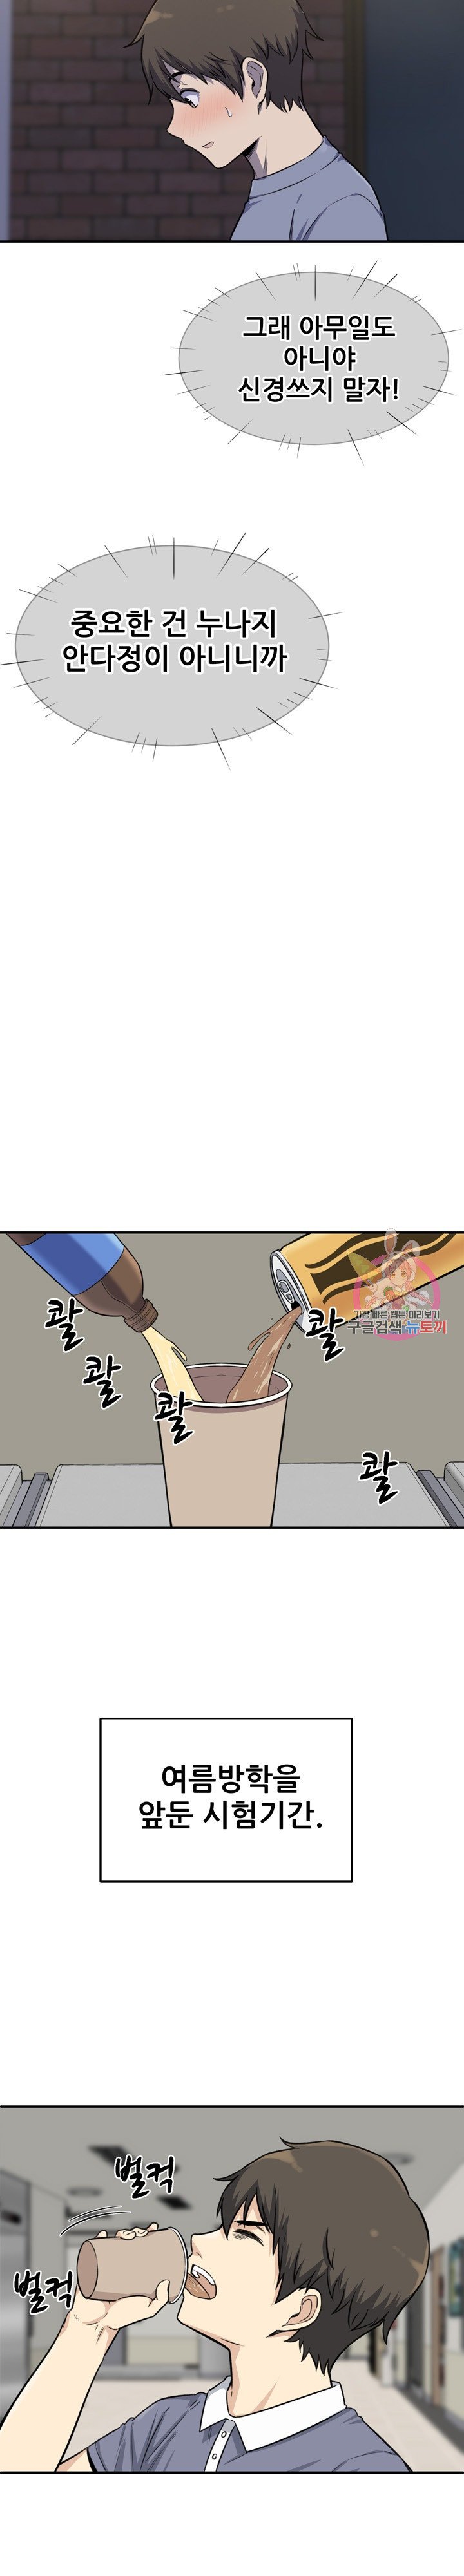 the-ark-is-me-raw-chap-31-16